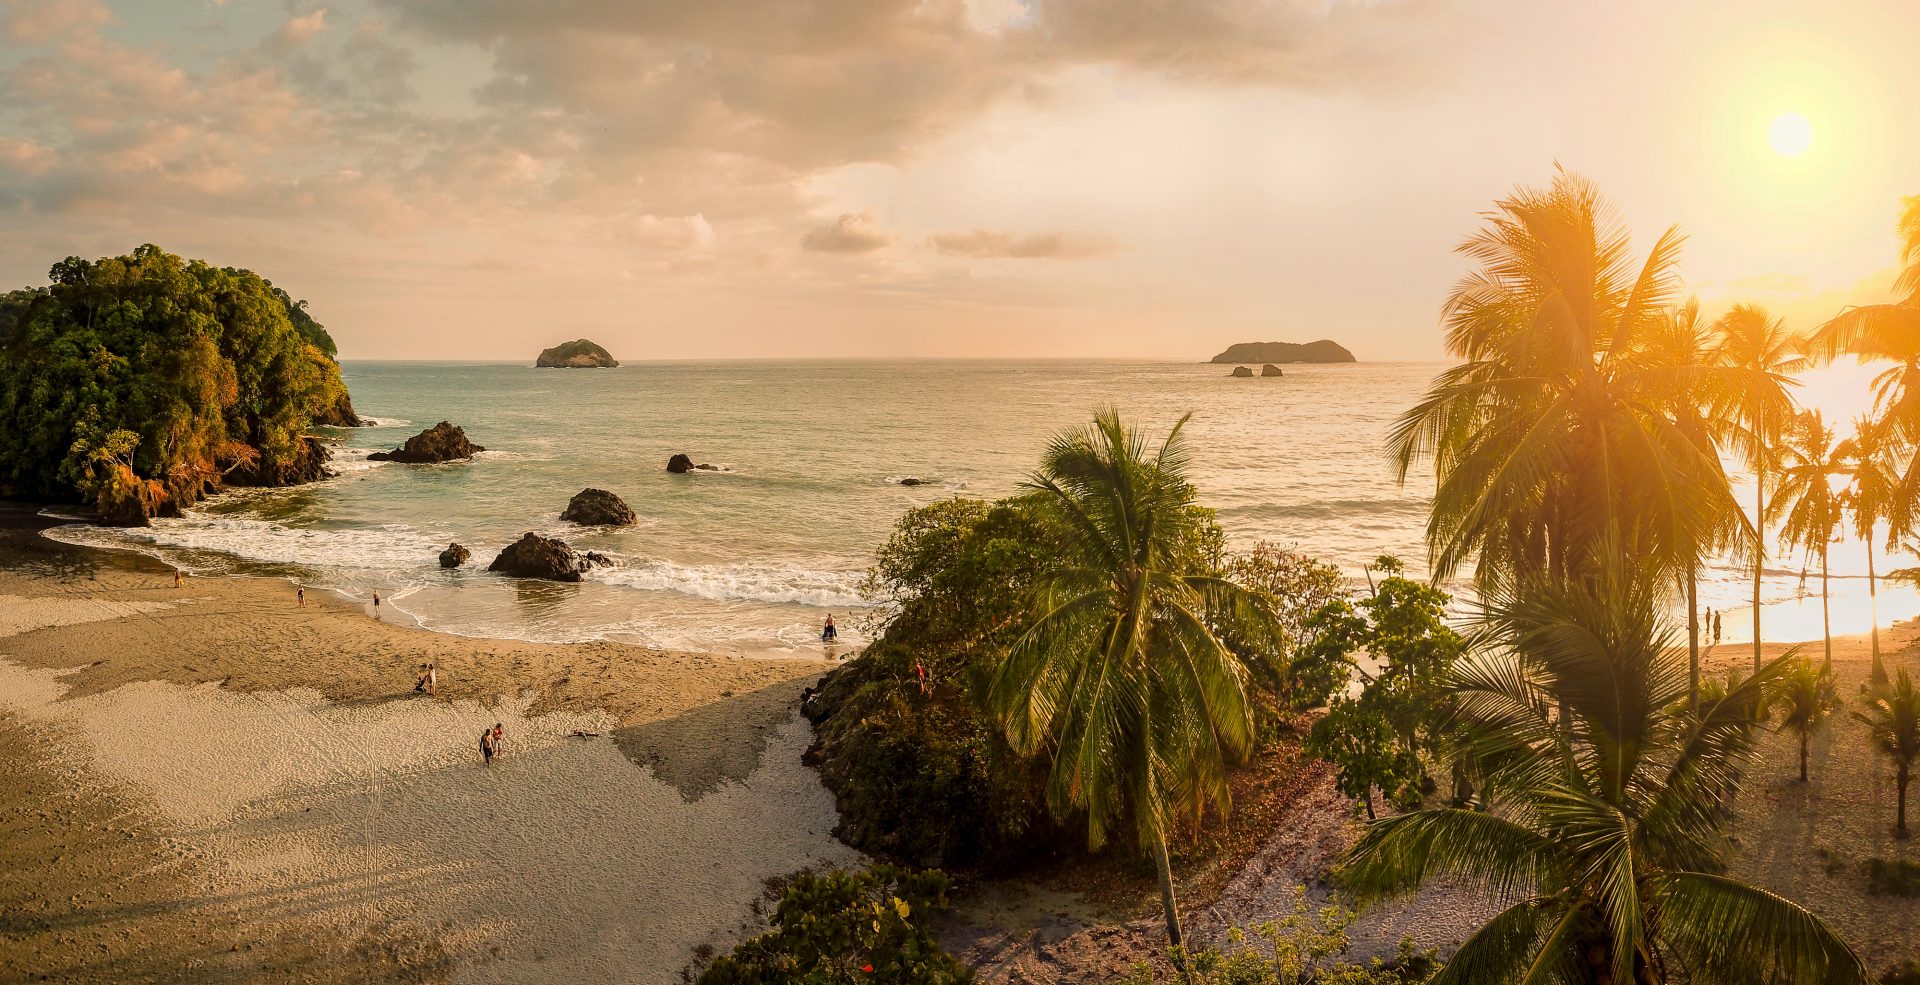 Costa Rica. Photo: Artic-Images/Getty.